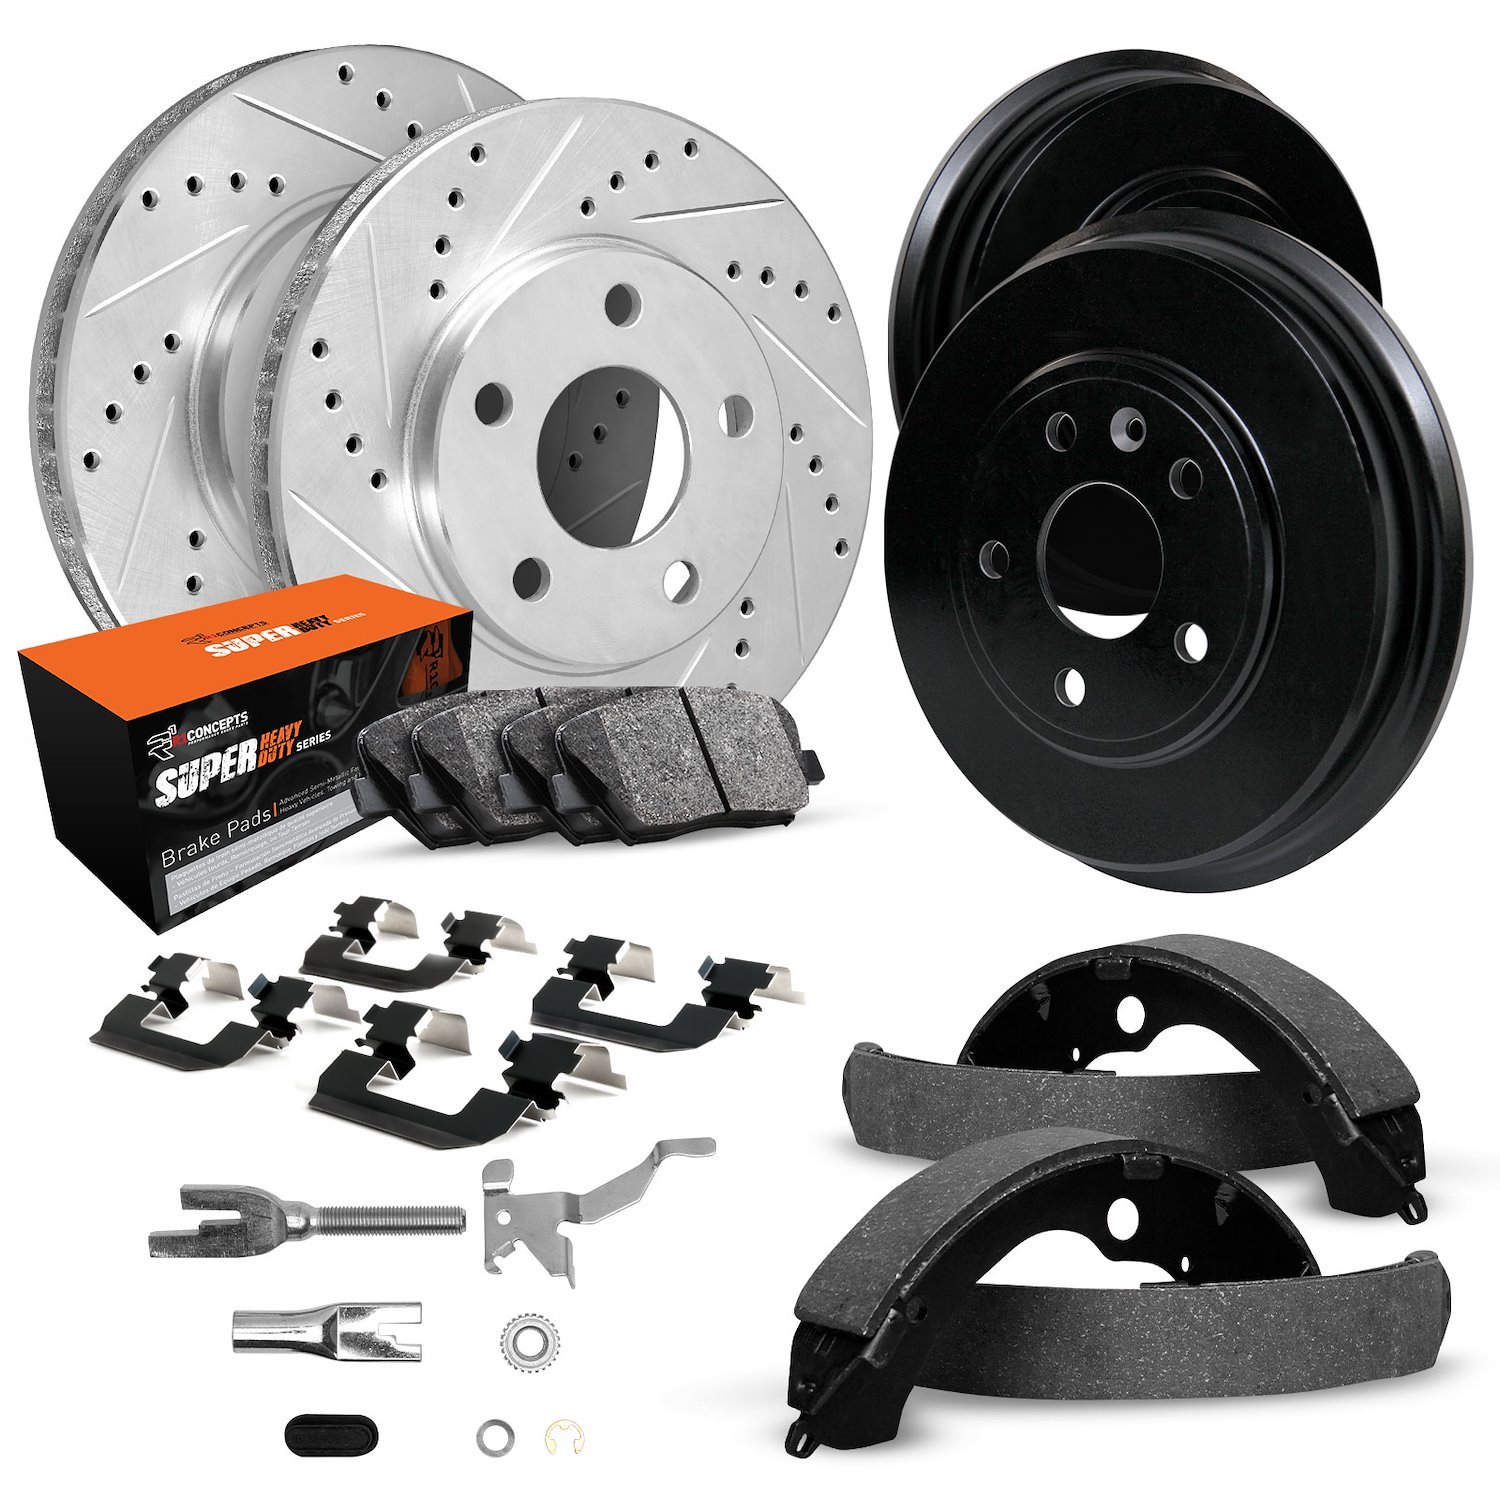 E-Line Drilled/Slotted Silver Rotor & Drum Set w/Super-Duty Pads, Shoes/Hardware/Adjusters, 1992-1993 Ford/Lincoln/Mercury/Mazda